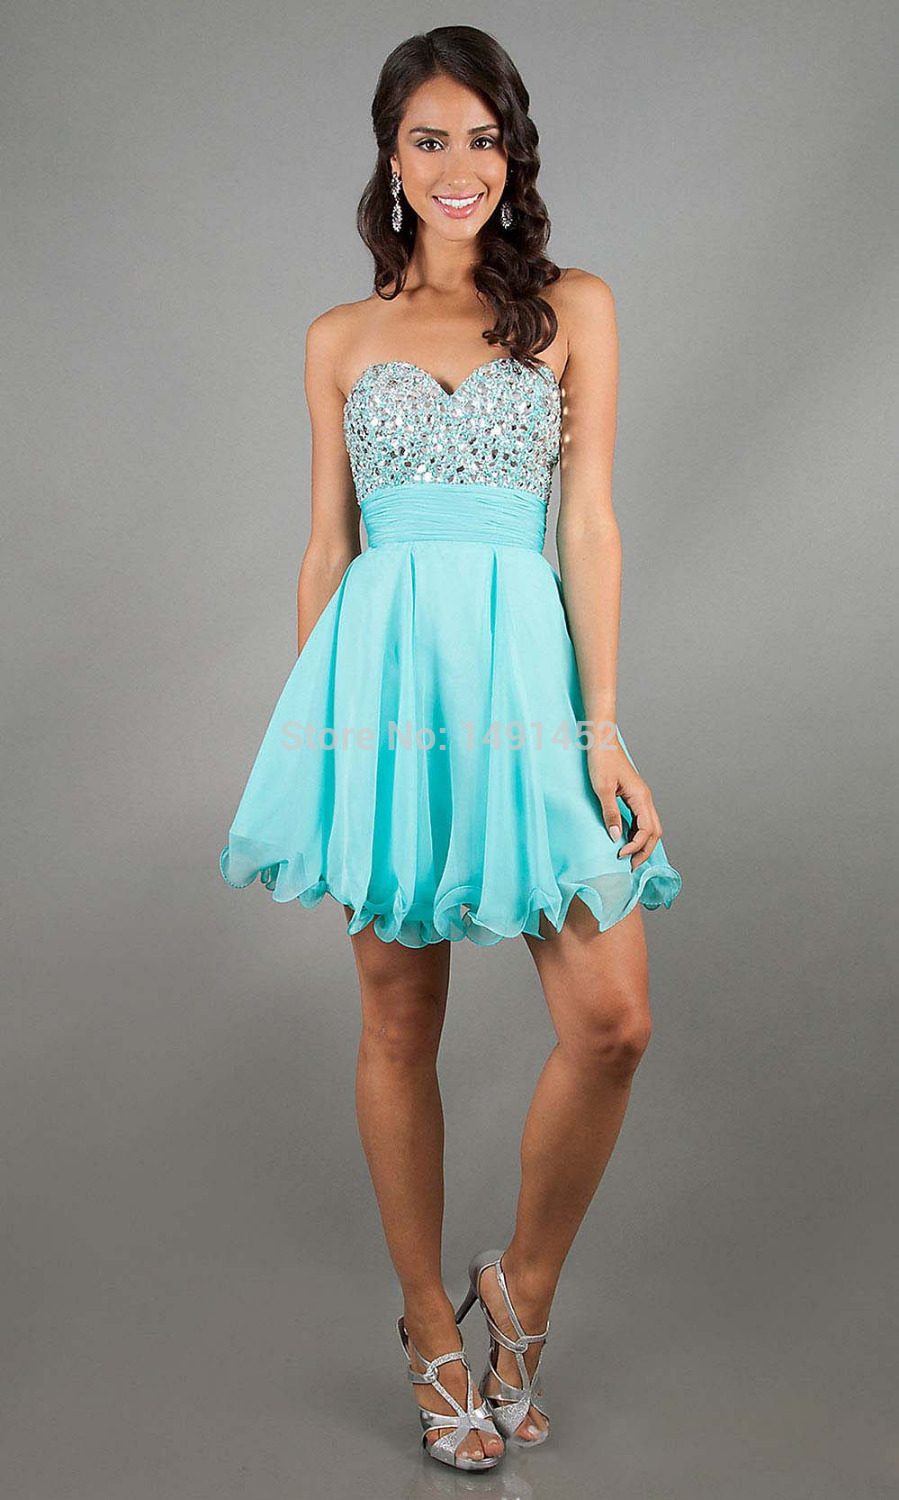 Party Dresses Under 100 Dollars